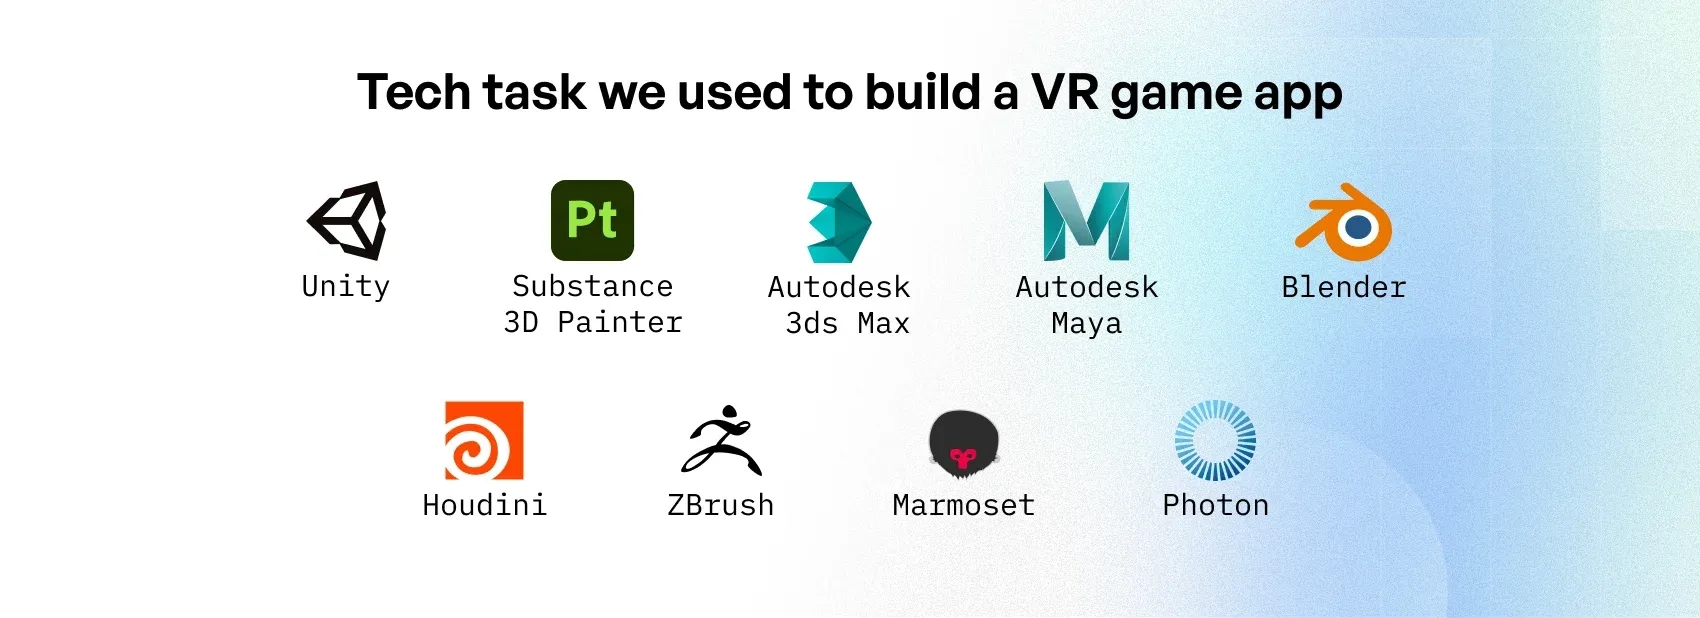 Tech stack to build a VR game 